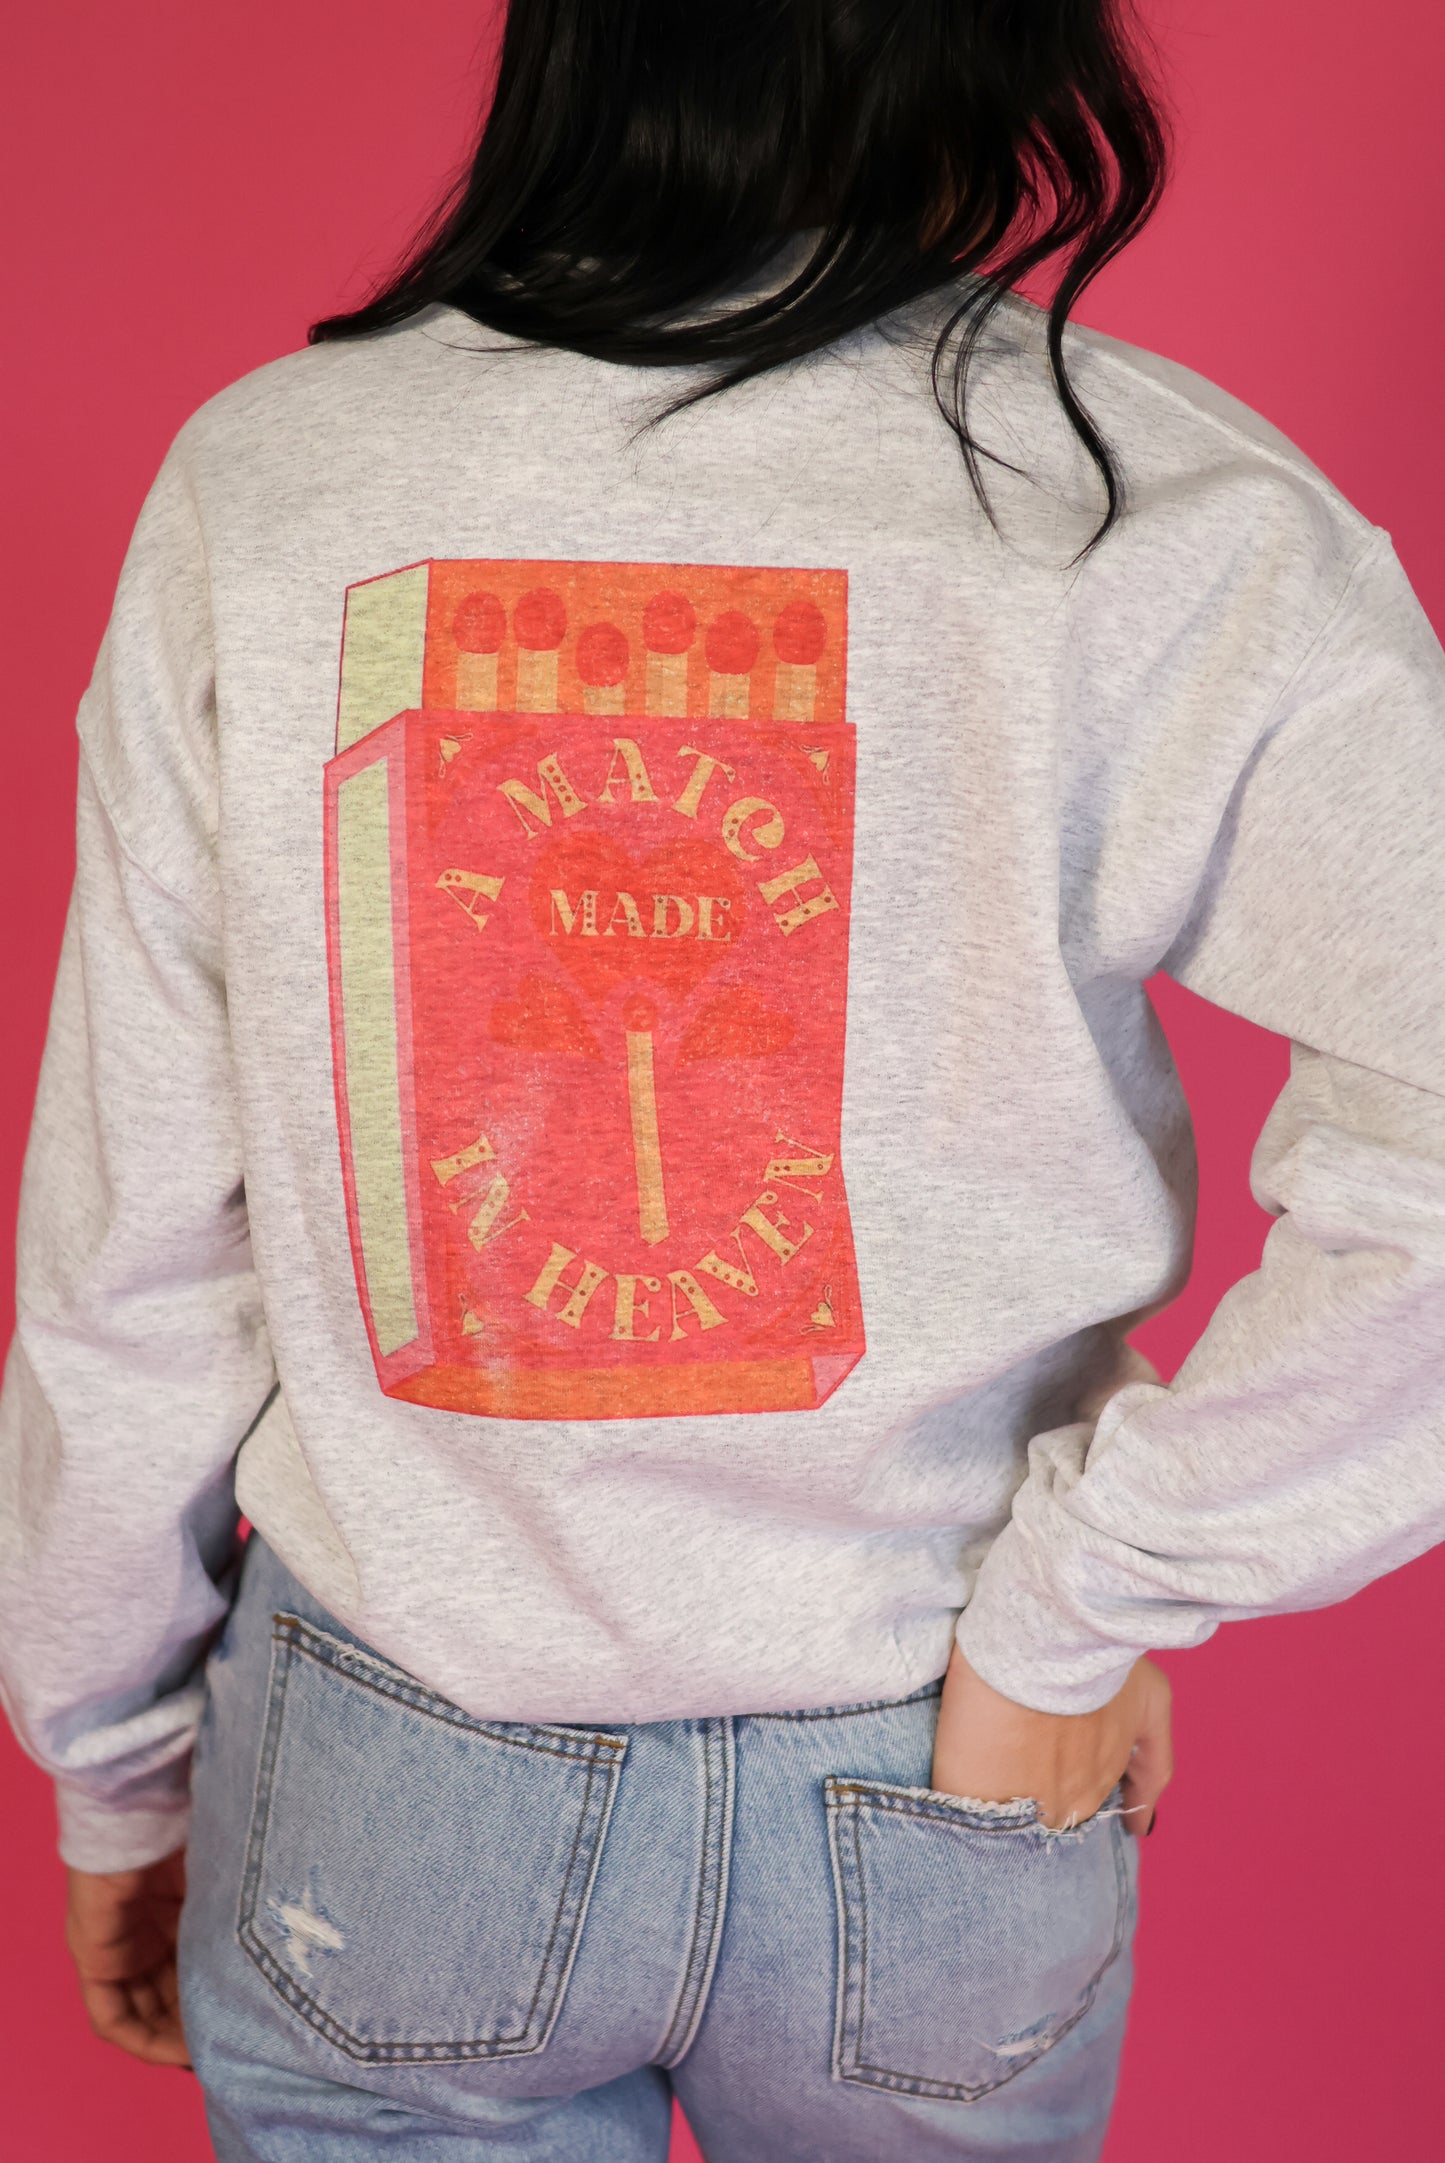 Match Made In Heaven crewneck